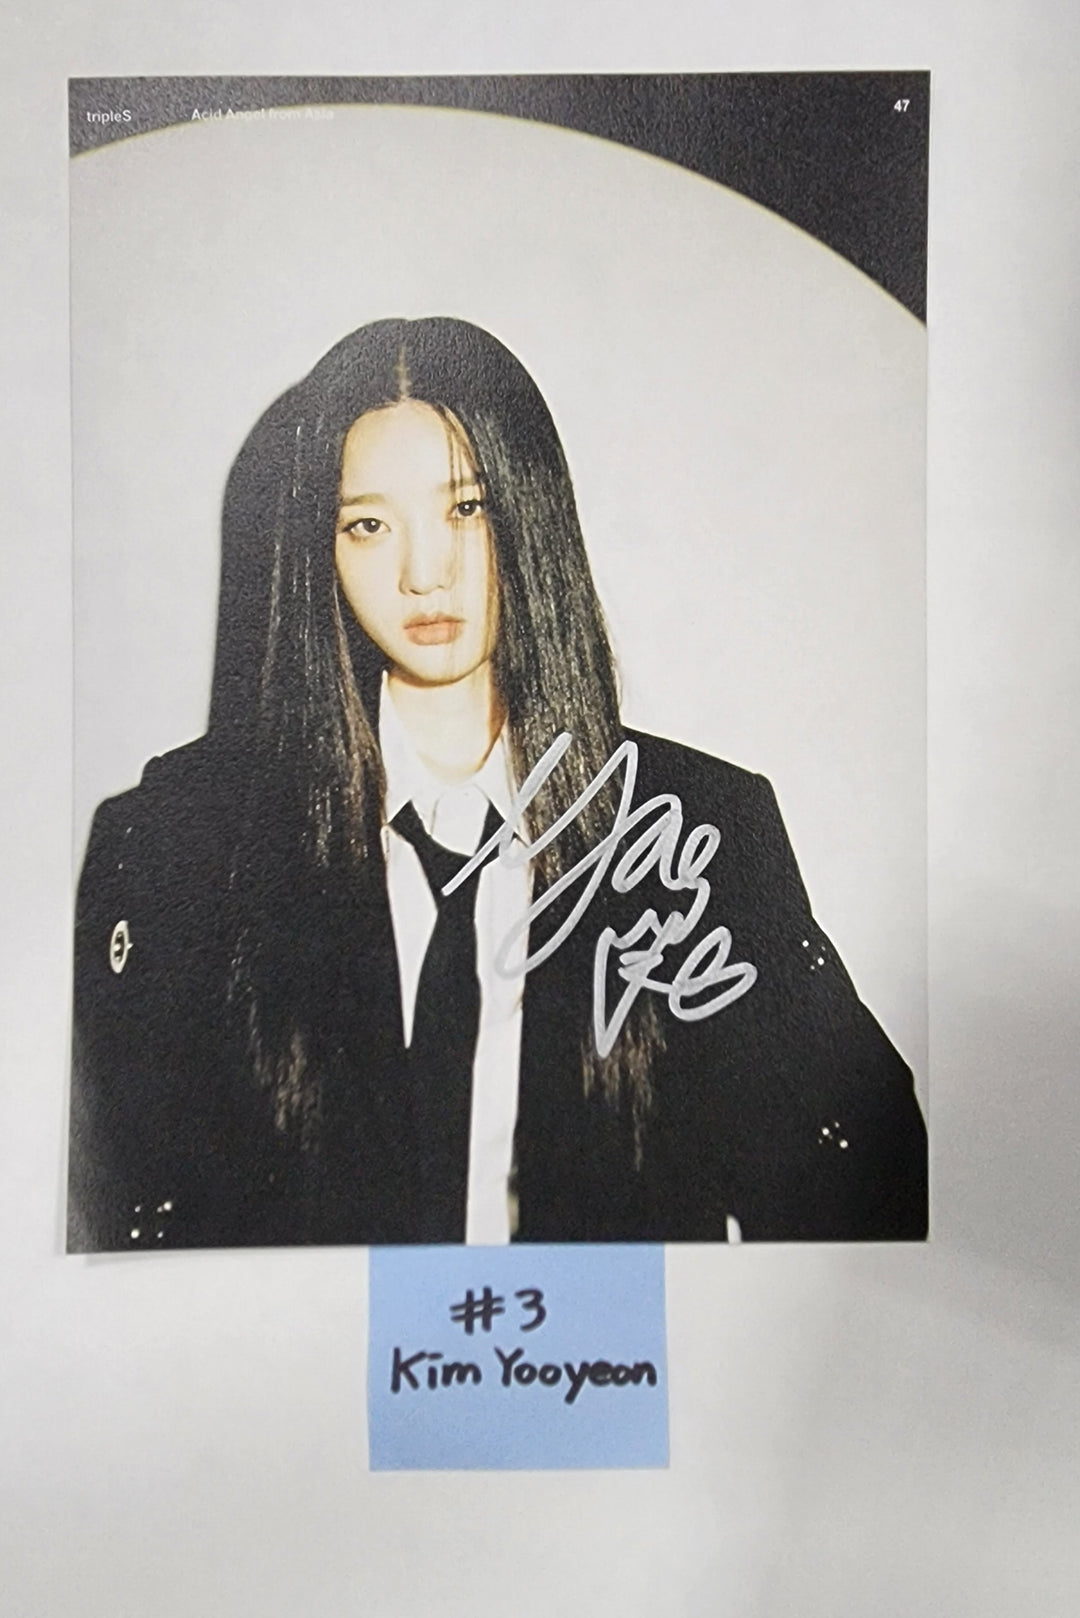 TripleS "Acid Angel from Asia" - A Cut Page From Fansign Event Album [12/15]